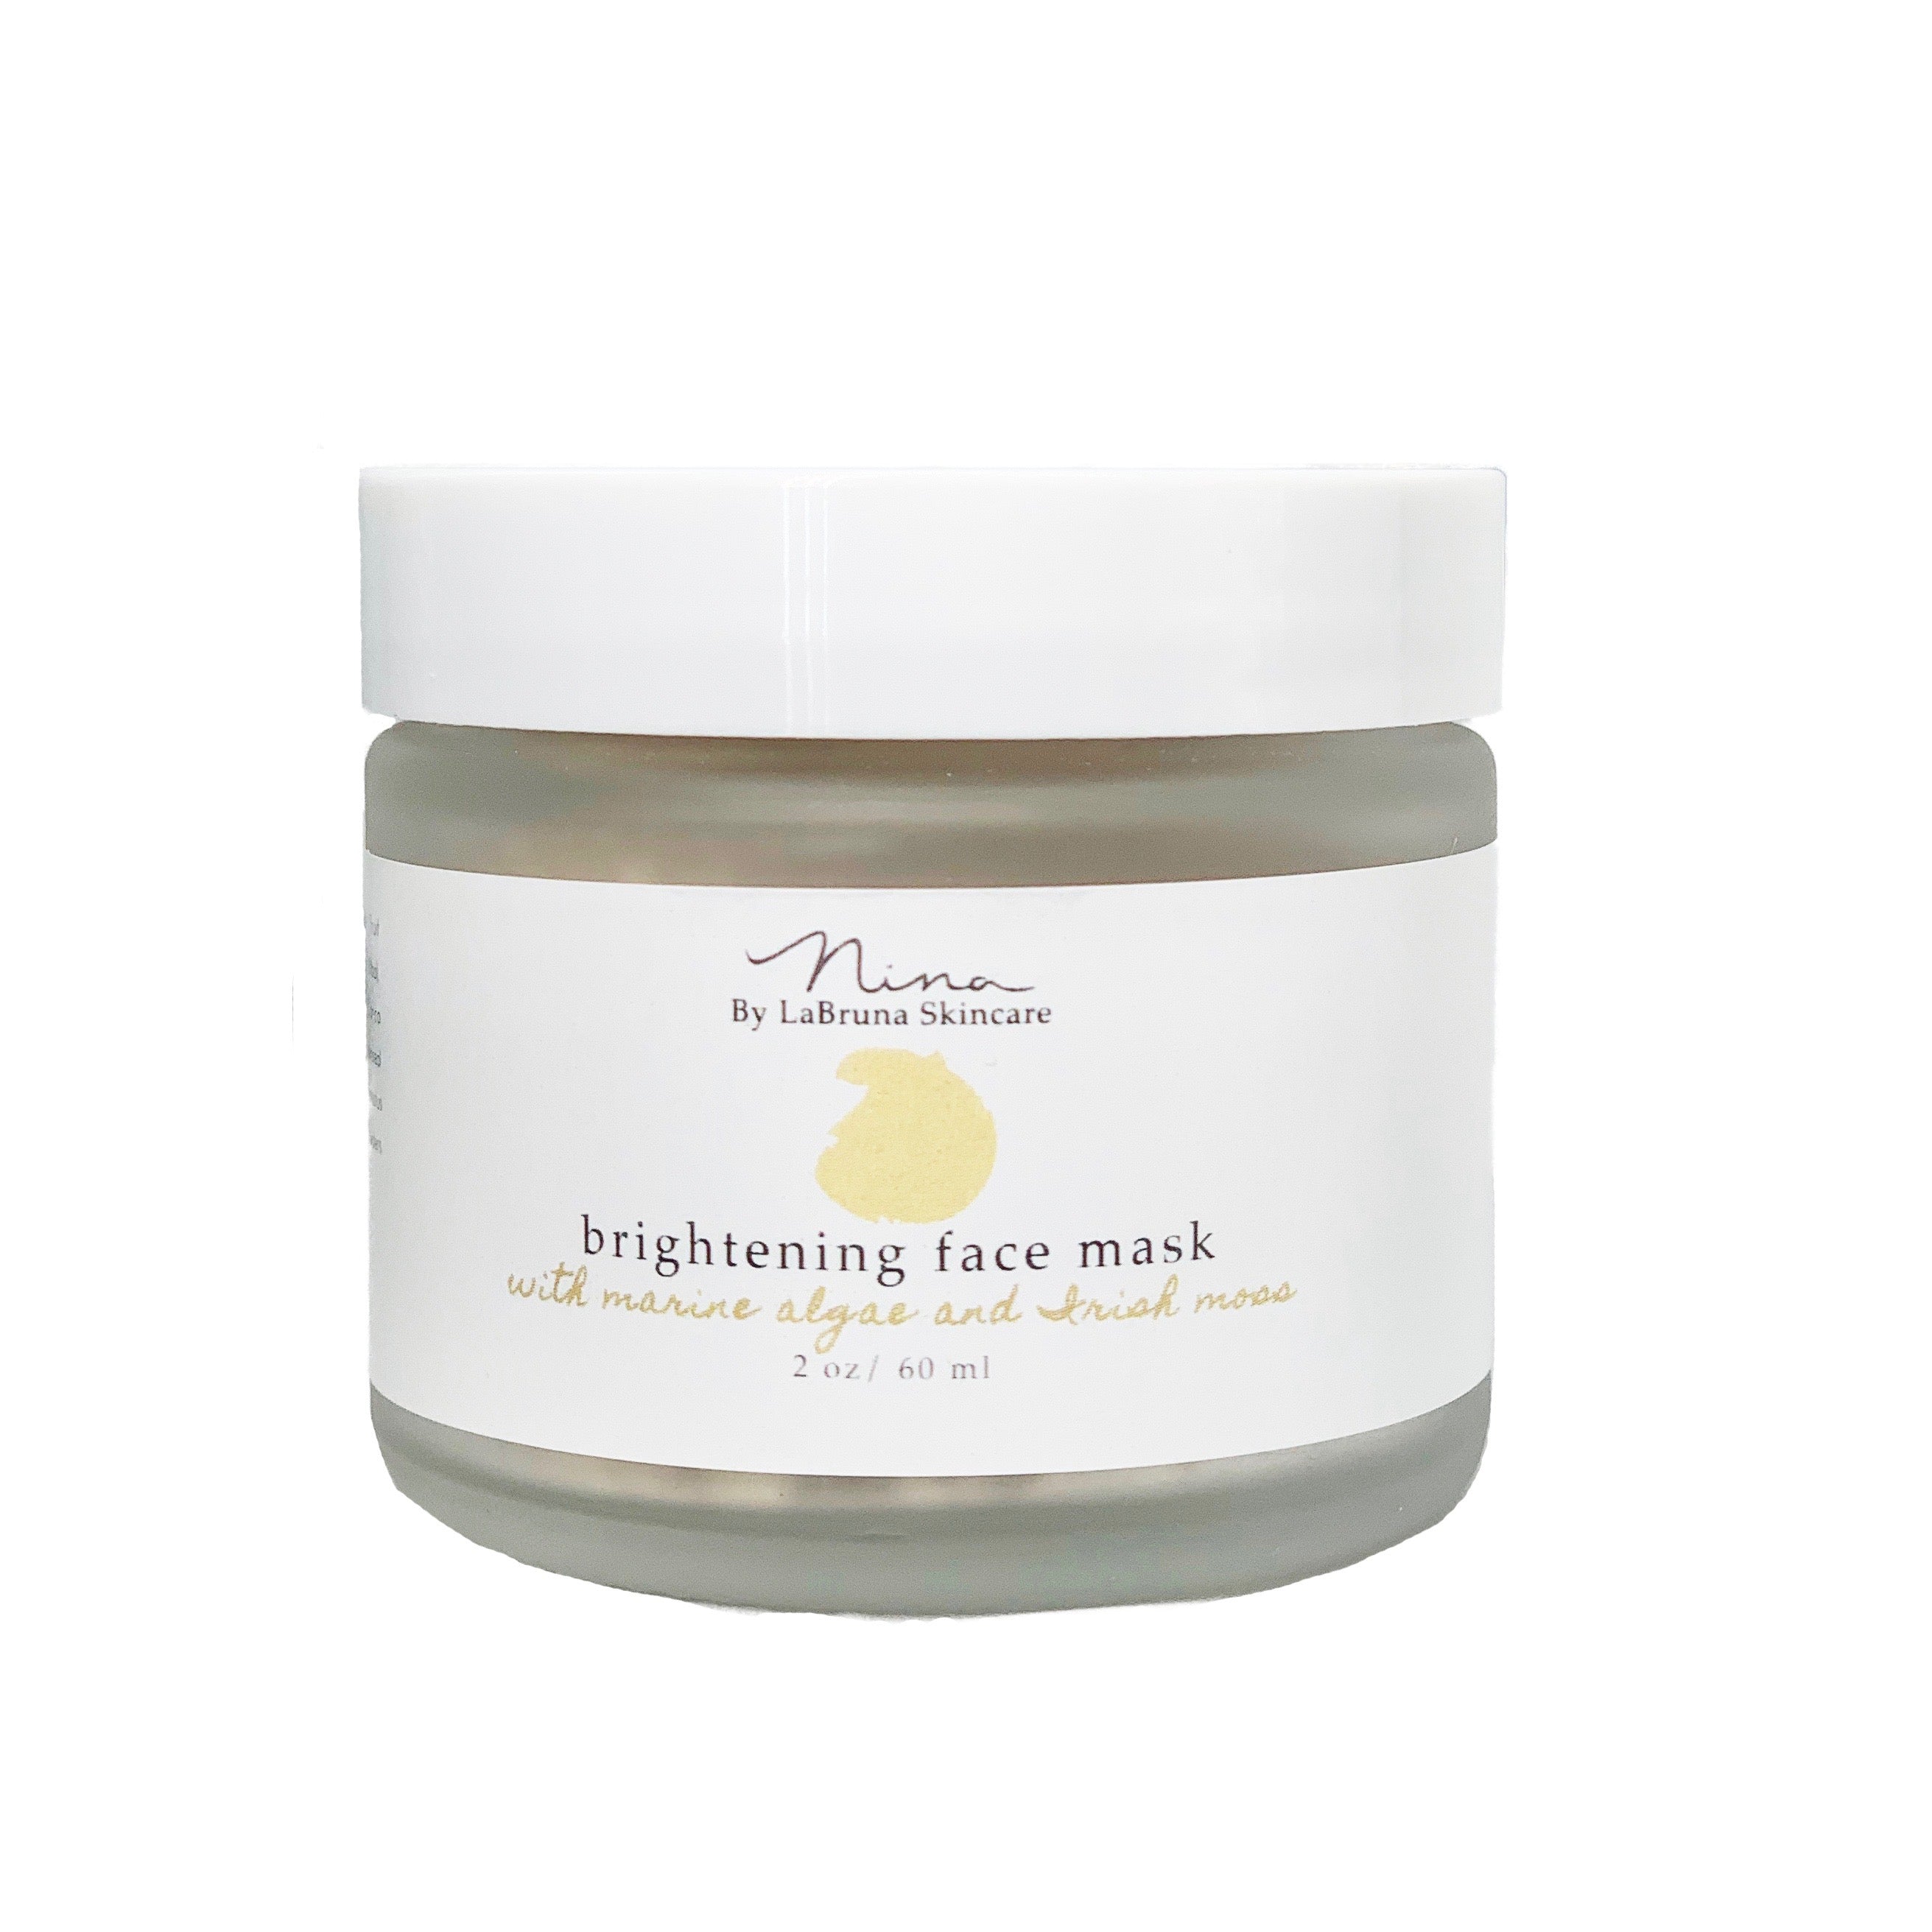 Brightening Face Mask with Goldenberry and Shiitake Mushroom by LaBruna Skincare